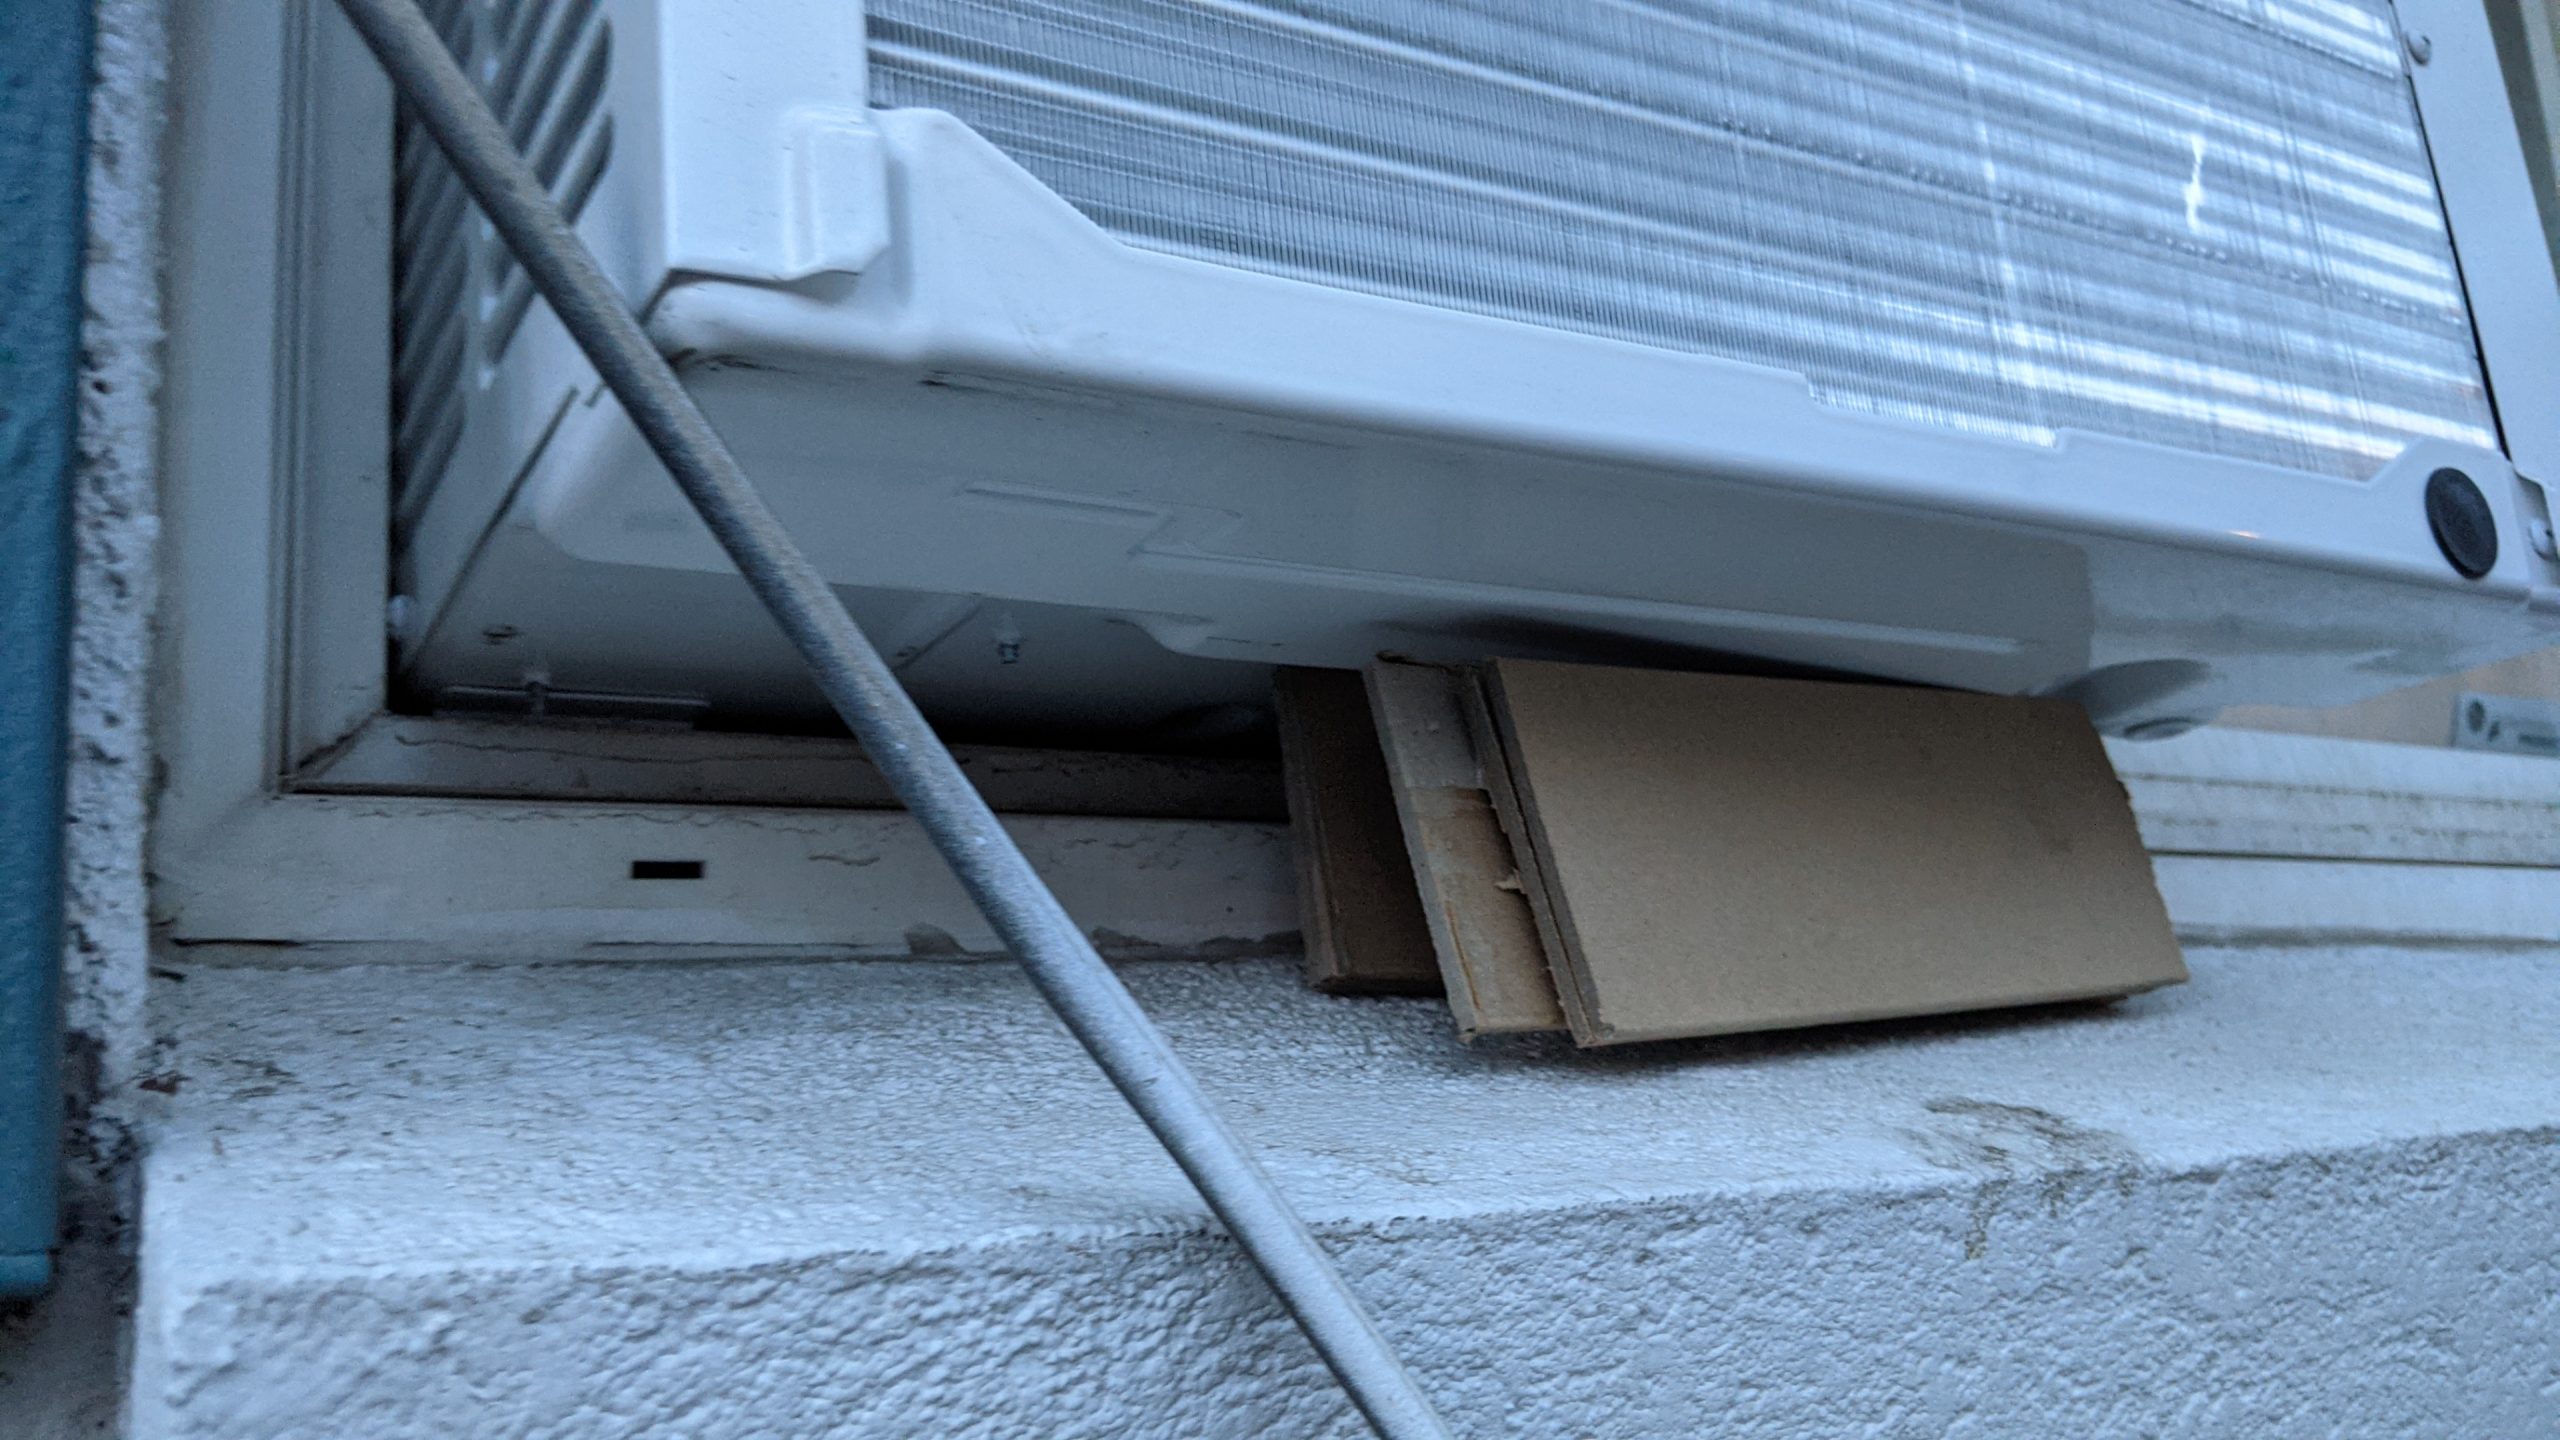 Air conditioning unit precariously placed on a piece of cardboard, depicting poor repair standards